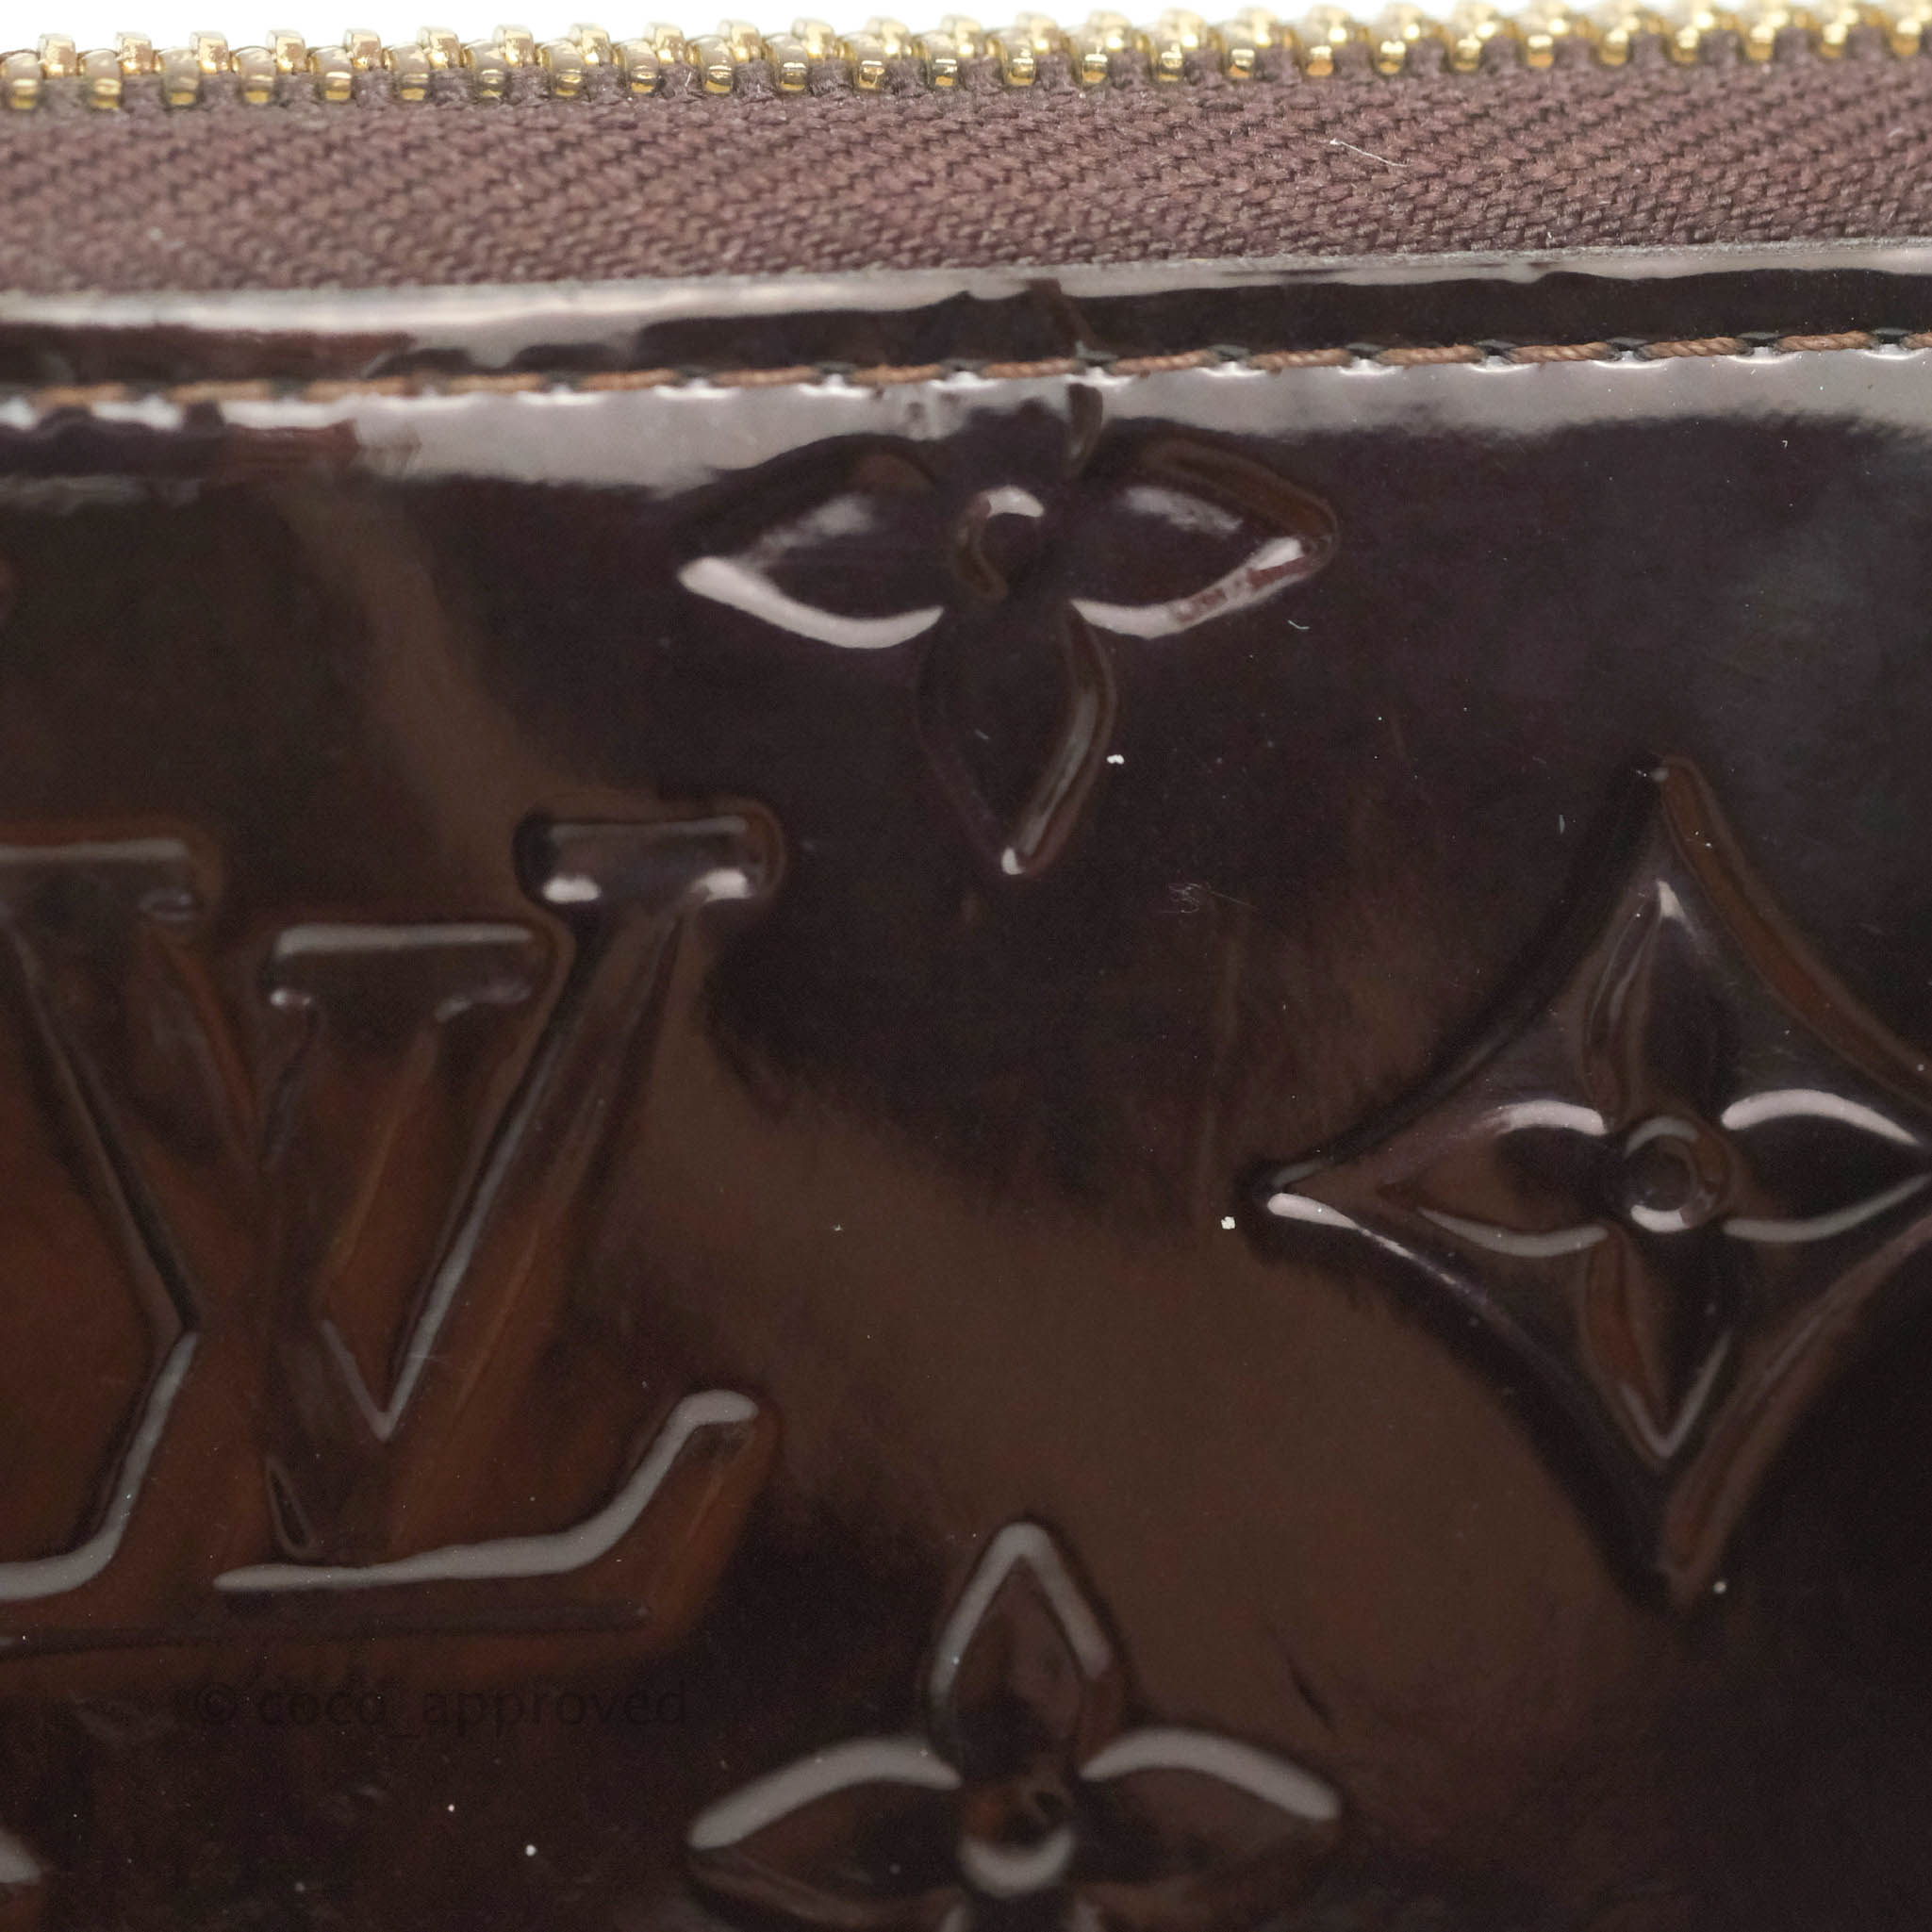 LV zipper wallet – TNR Creations To Never Replace